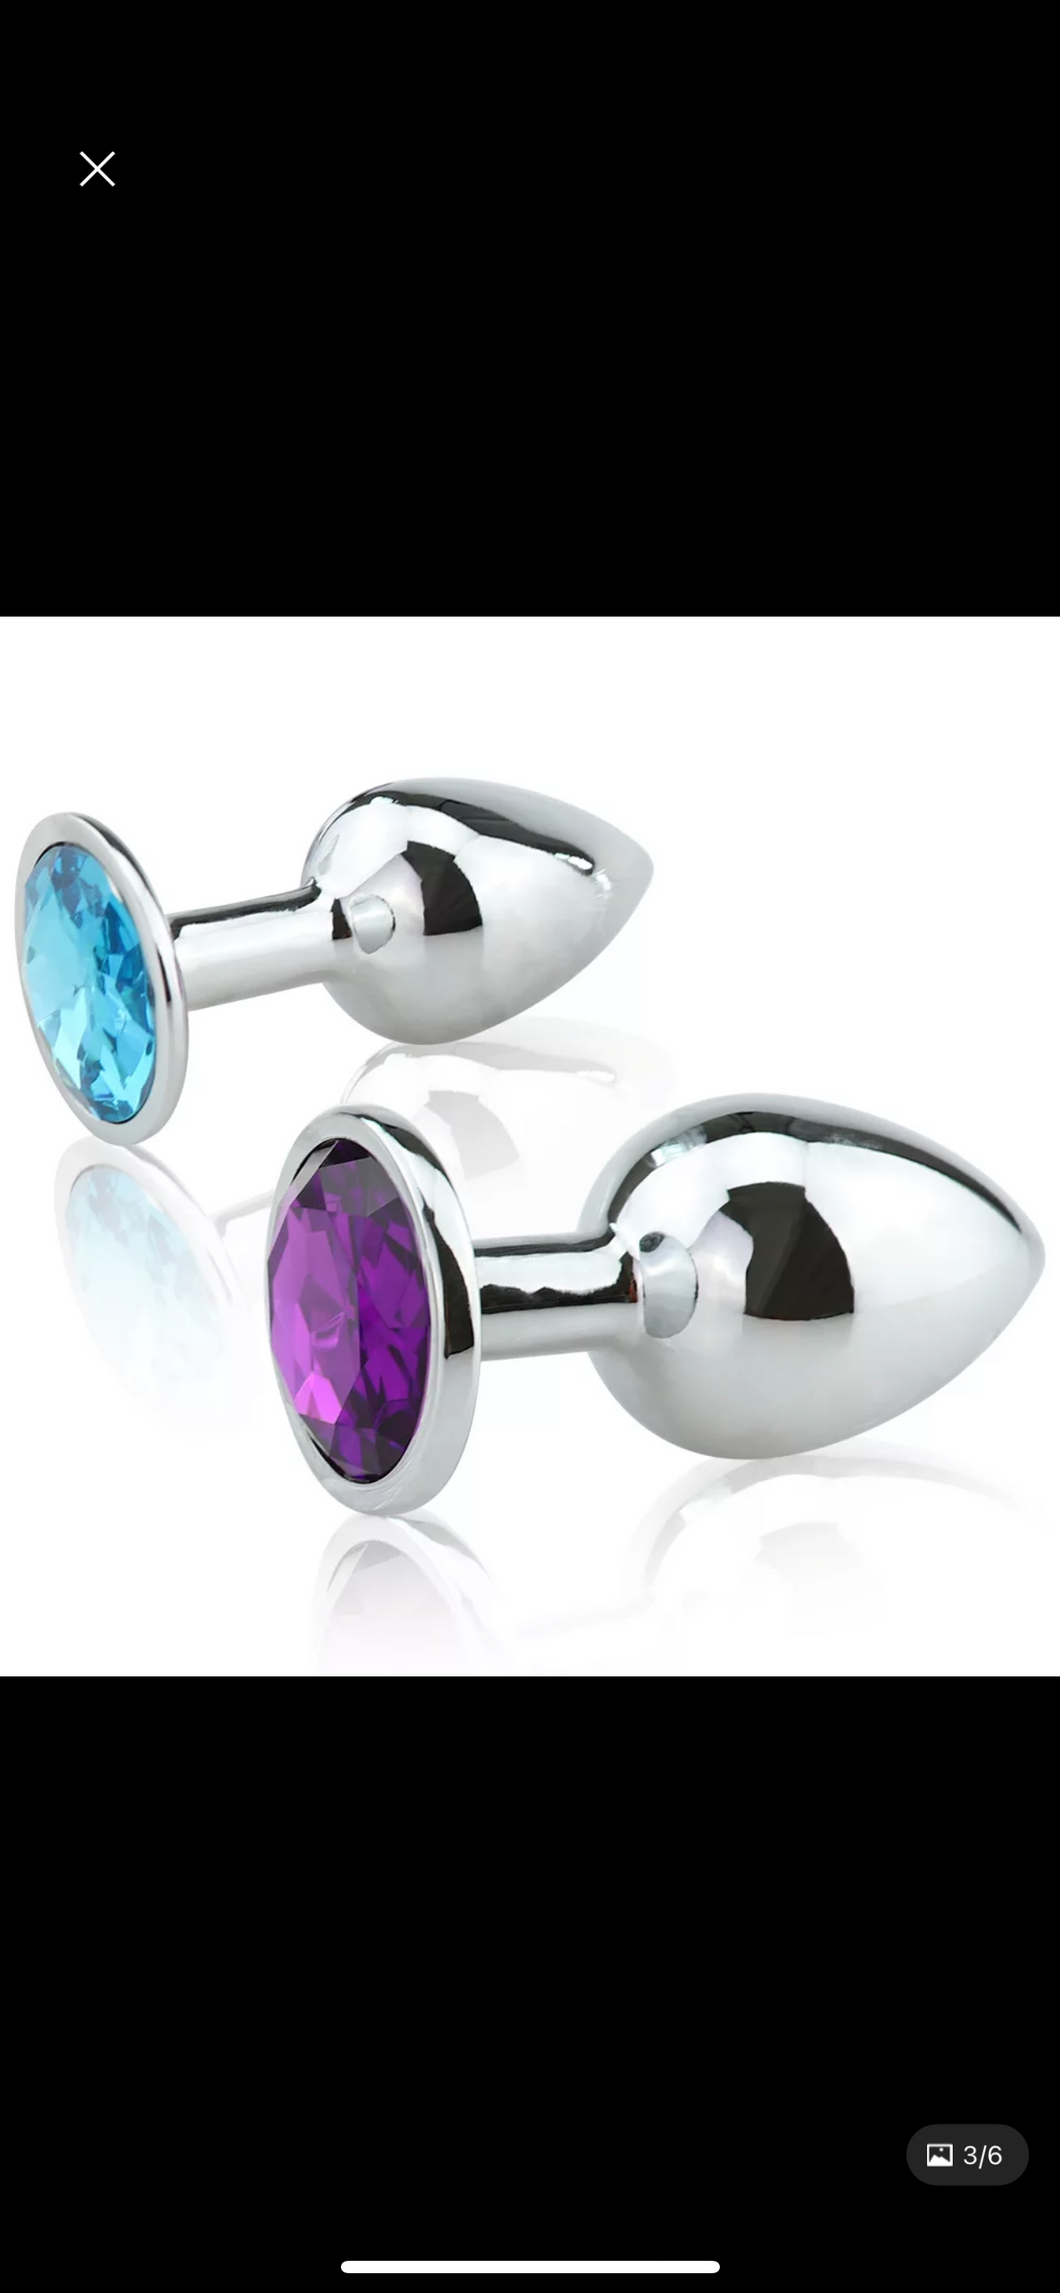 Stainless steel anal butt plugs with gems